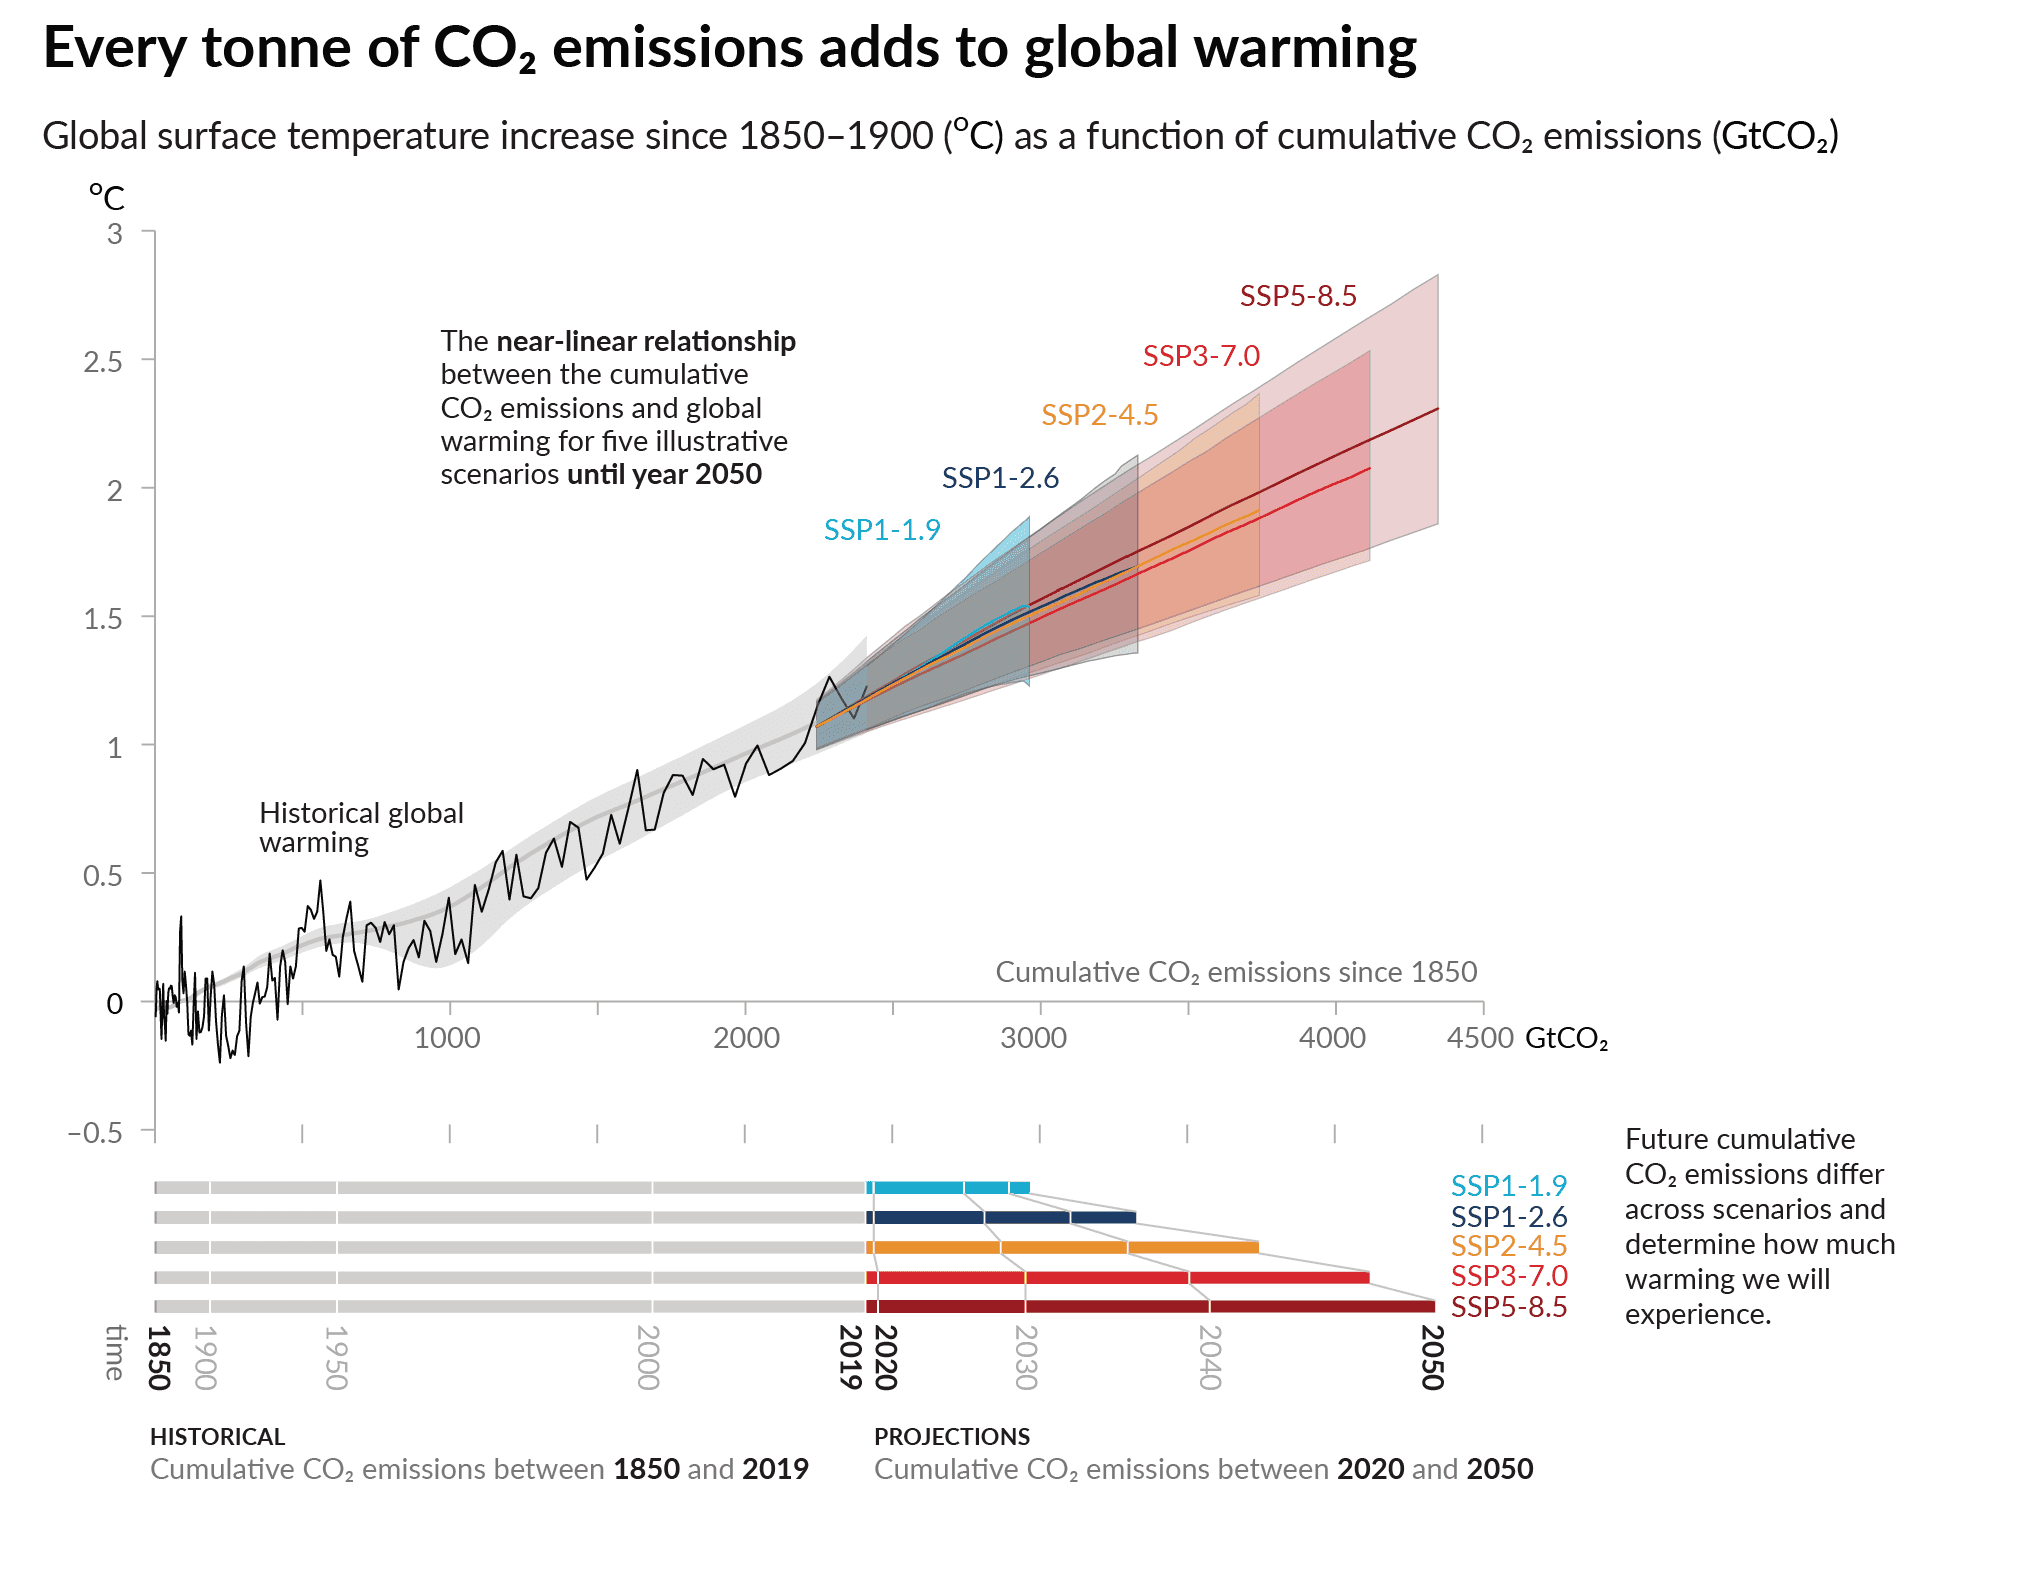 Figure SPM.10 | Near-linear relationship between cumulative CO2 emissions and the increase in global surface temperature